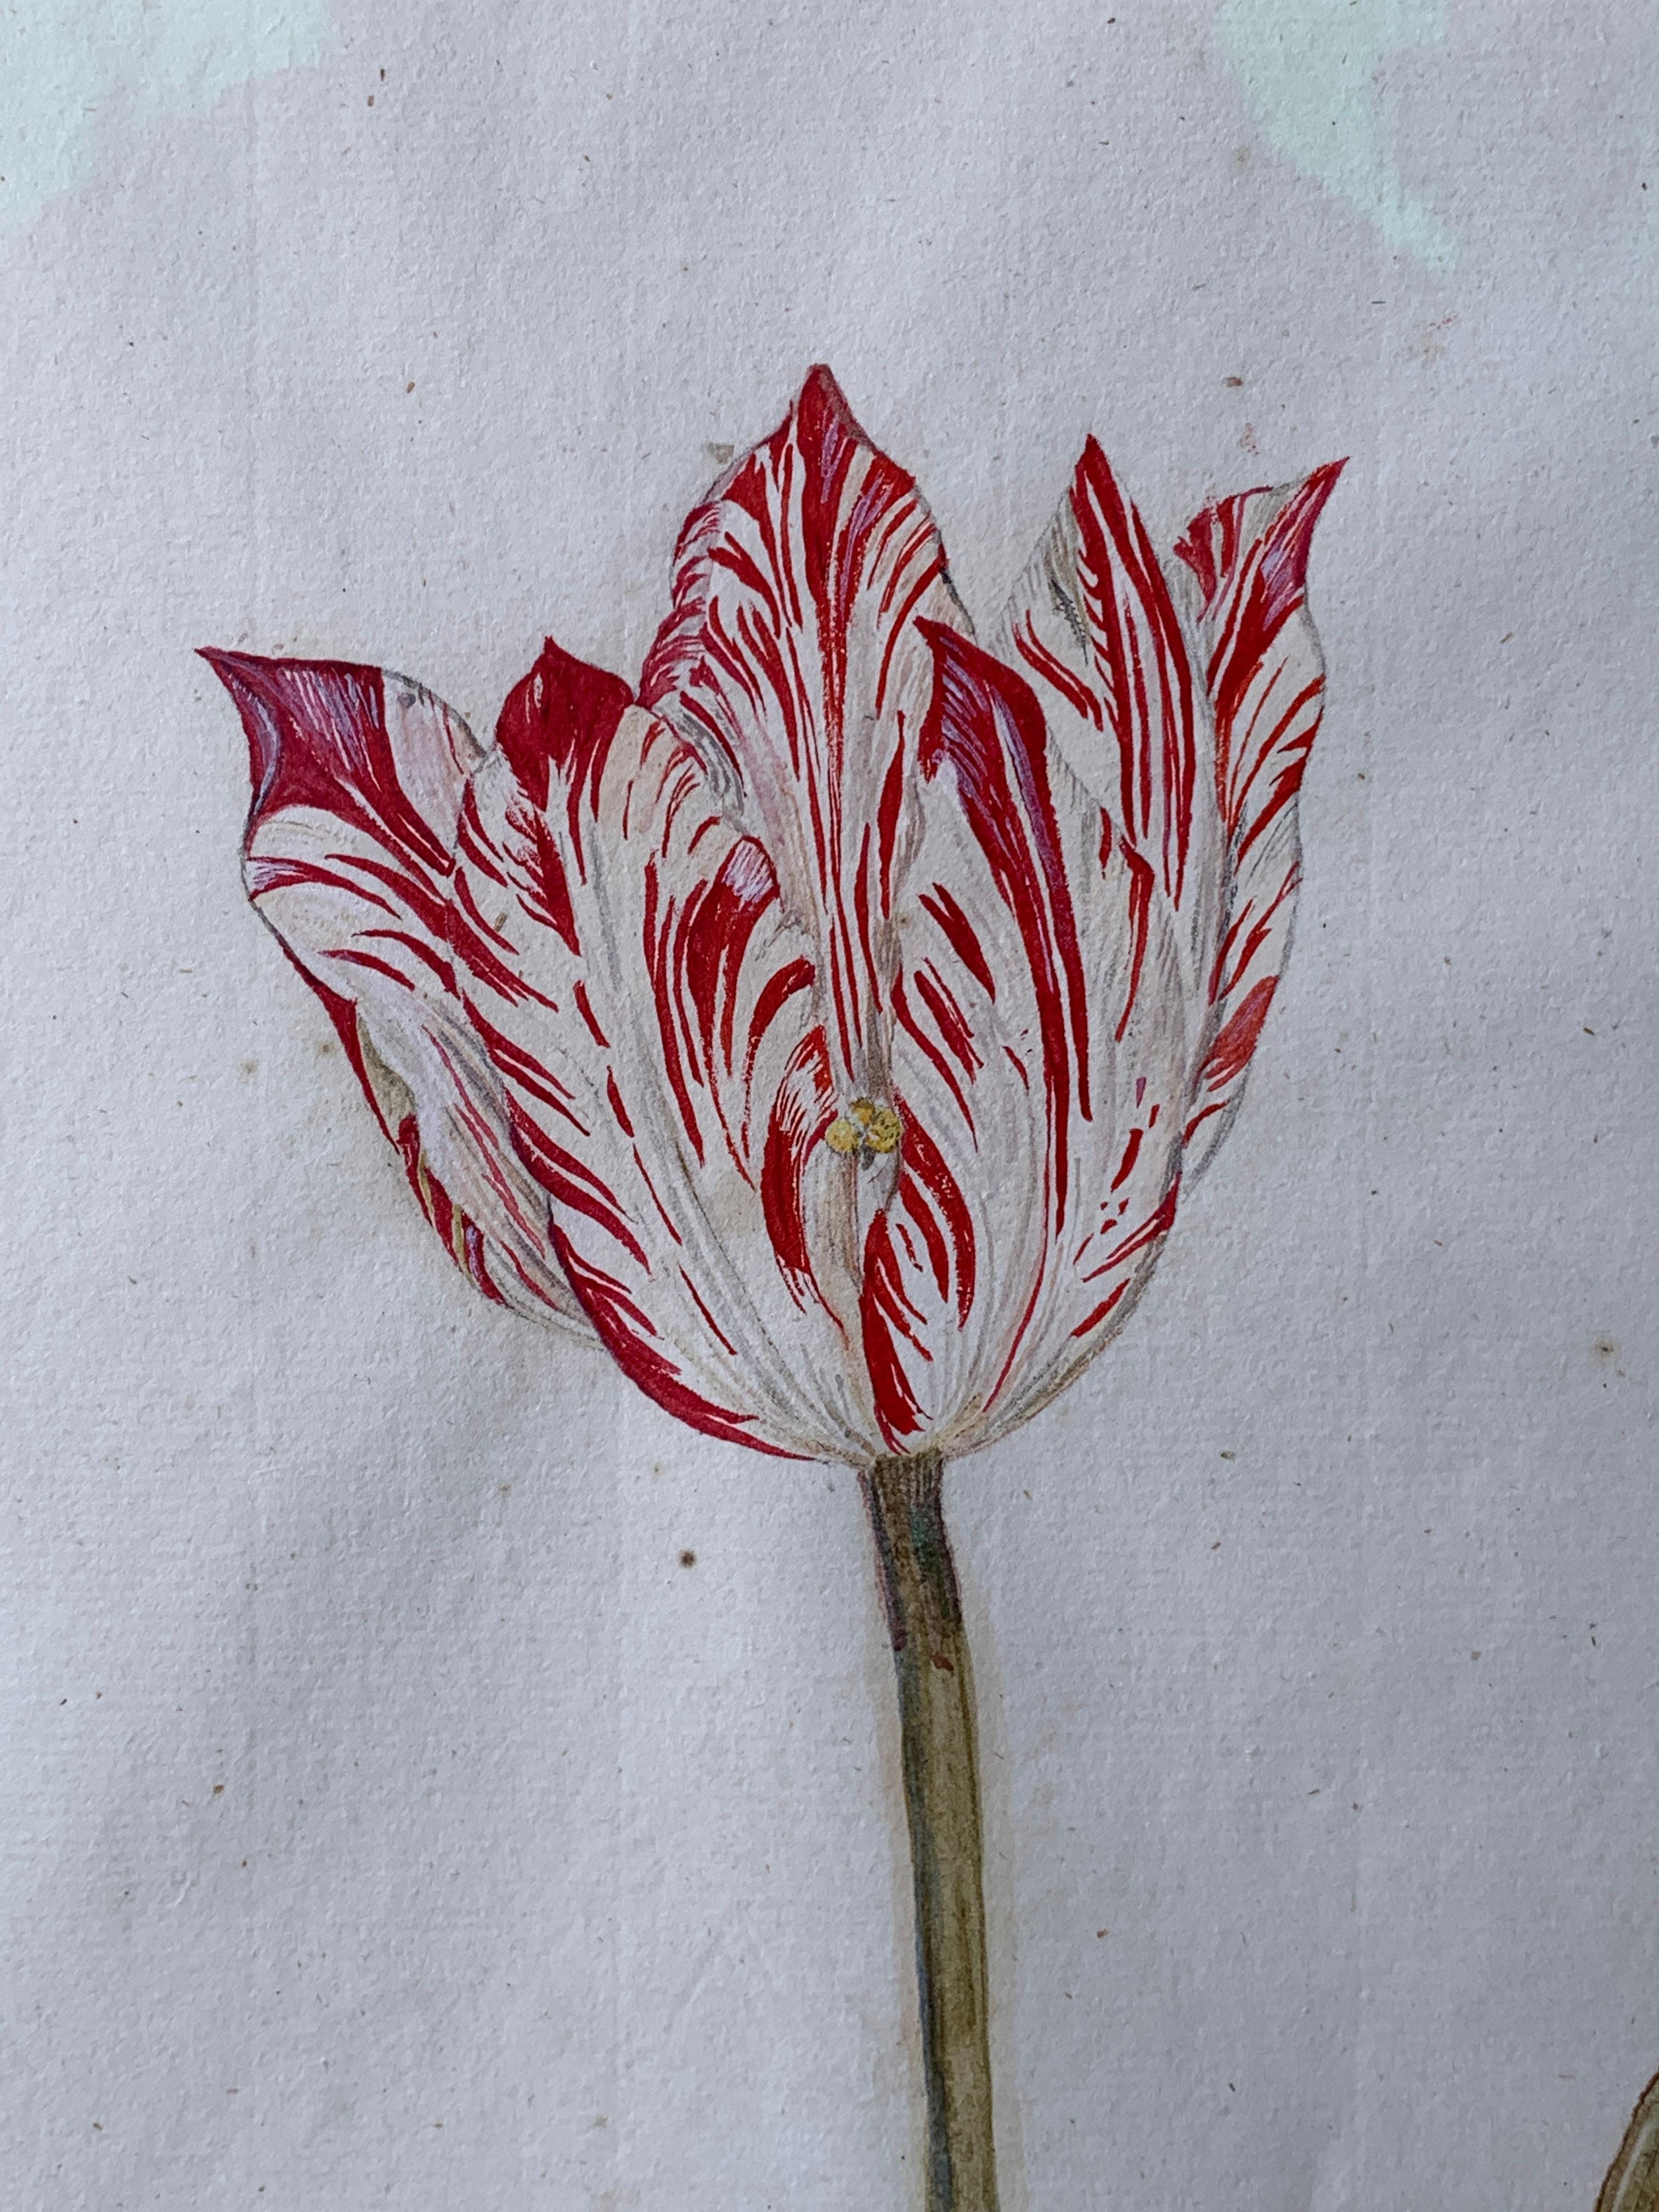 A Dutch school watercolor of a tulip.
The Netherlands.
Made mid-18th century.

This is a typical Dutch school watercolor from the middle of the 18th century. We see a very fine en detailed red and white tulip, painted on hand-made 18th-century